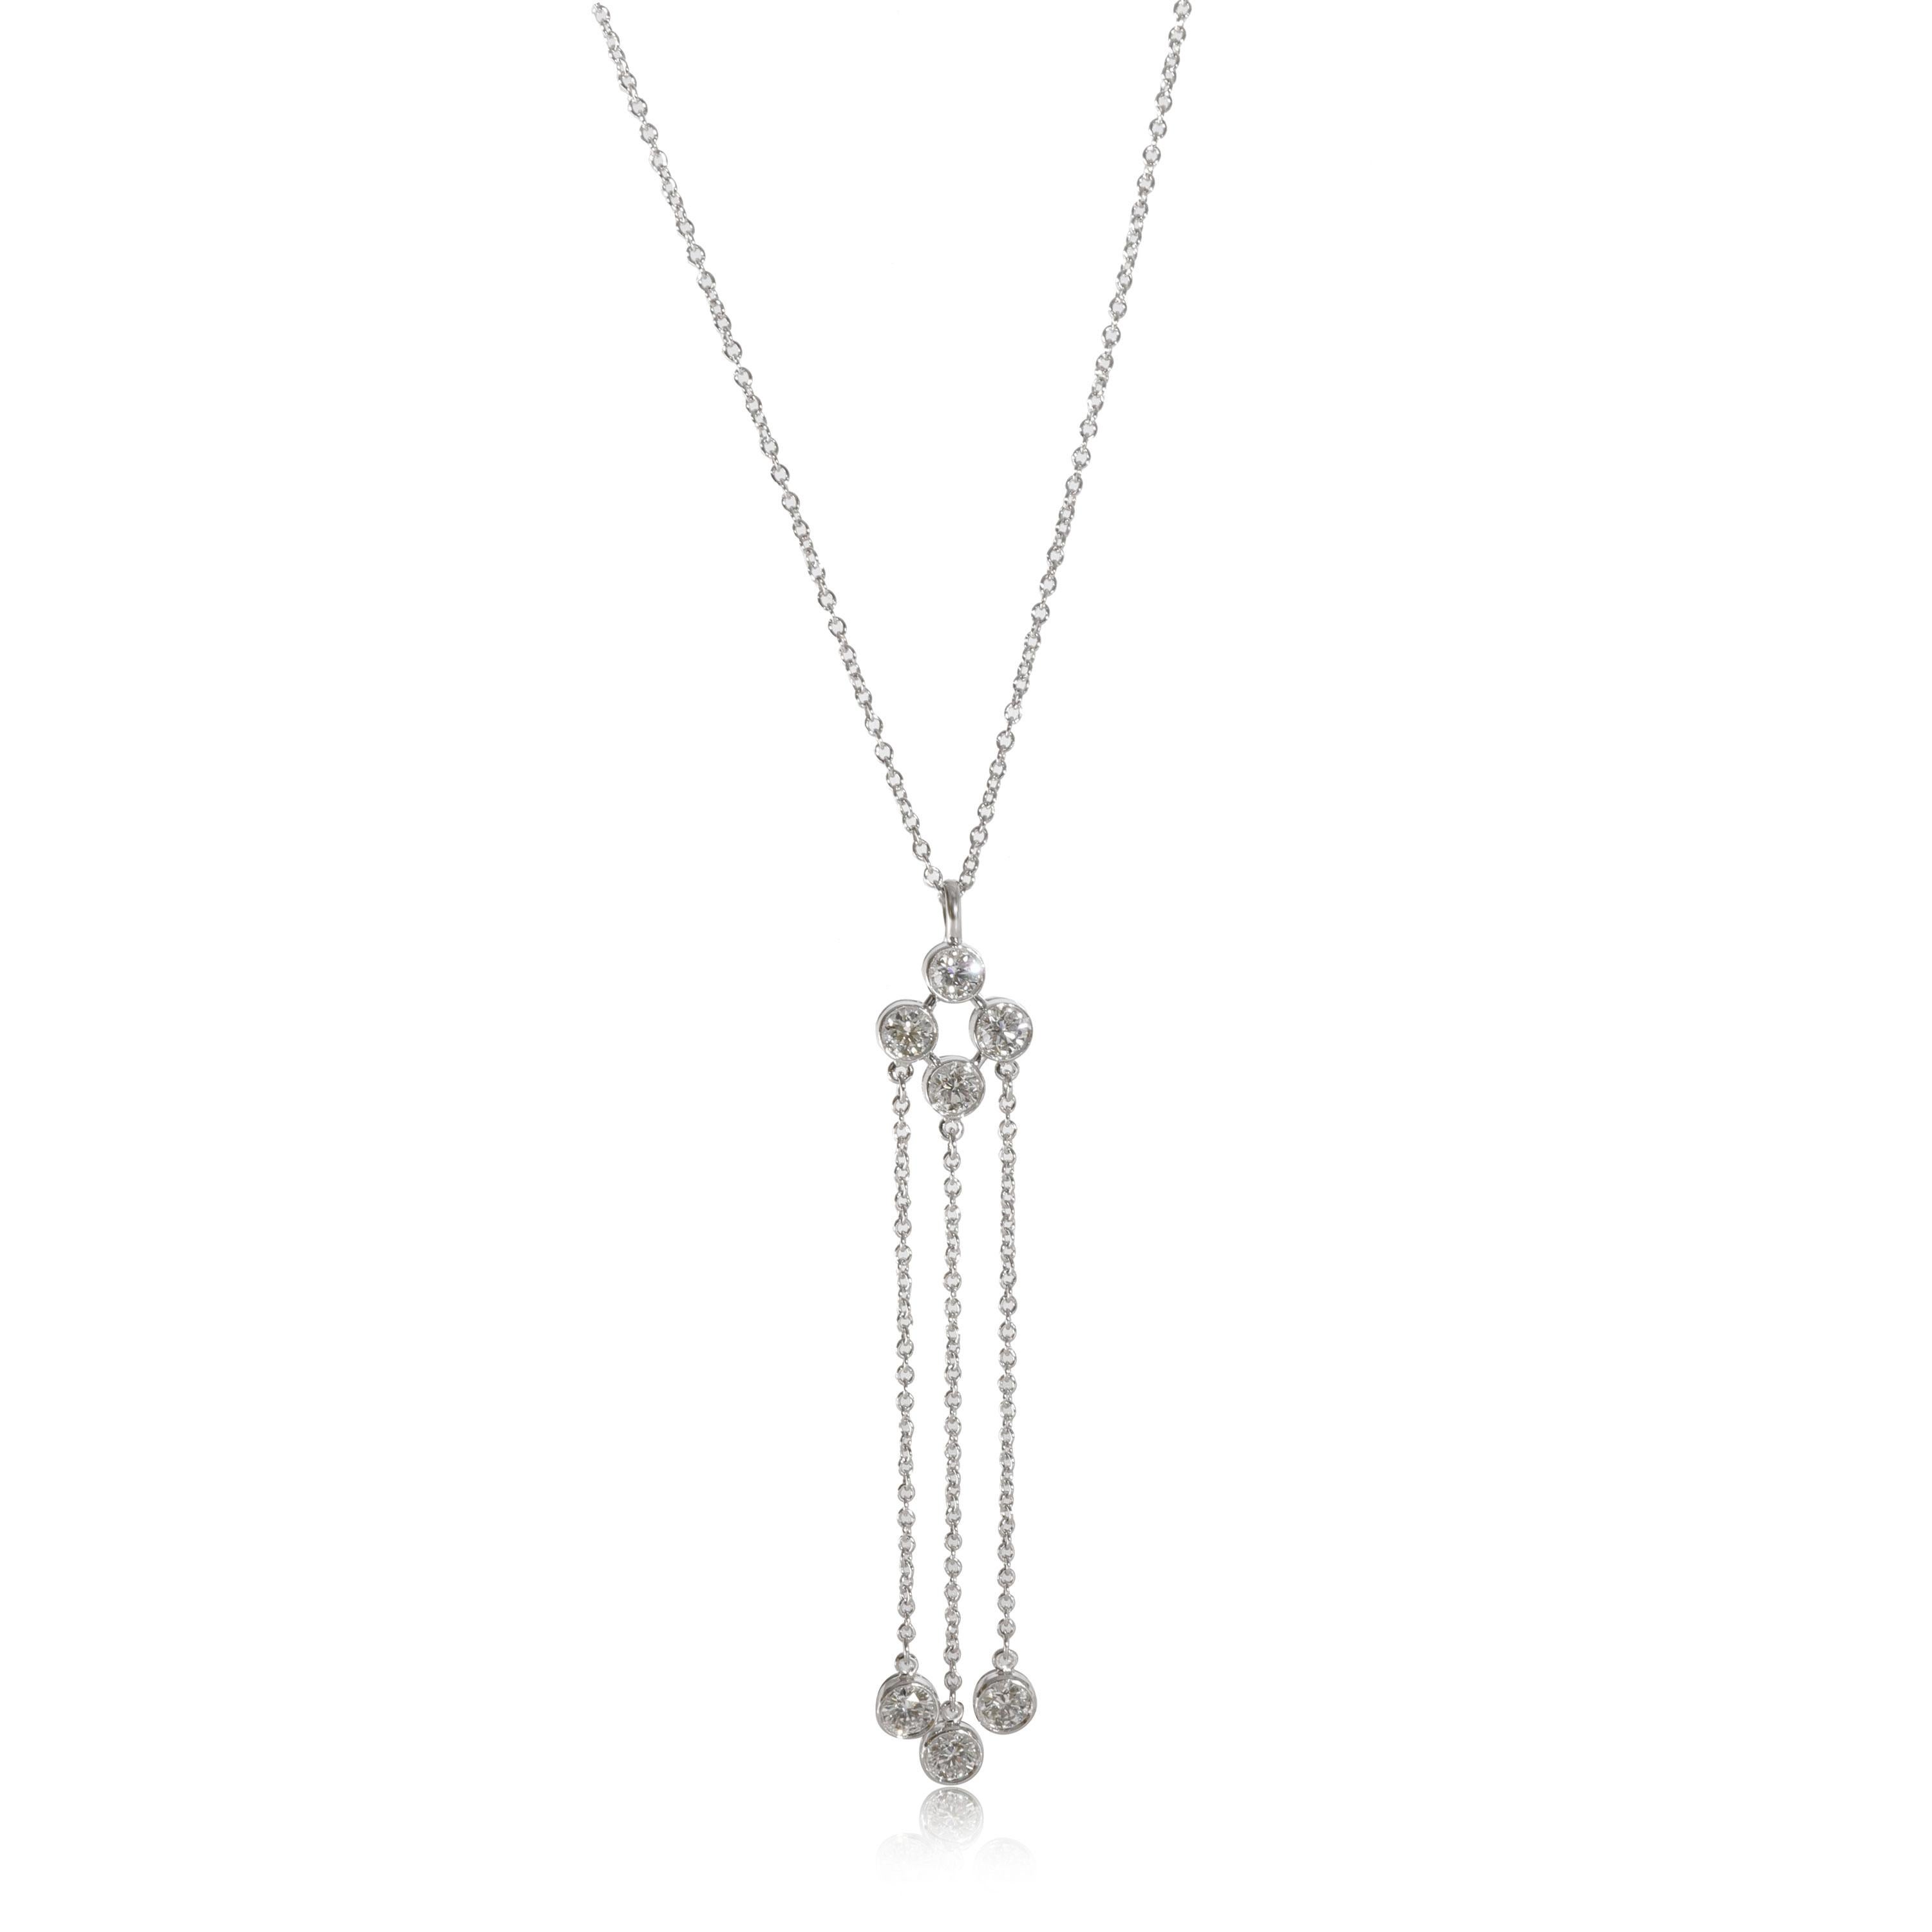 Tiffany & Co. Jazz Diamond Necklace in  Platinum 0.70 CTW

PRIMARY DETAILS
SKU: 127360
Listing Title: Tiffany & Co. Jazz Diamond Necklace in  Platinum 0.70 CTW
Condition Description: Retails for 4325 USD. In excellent condition and recently